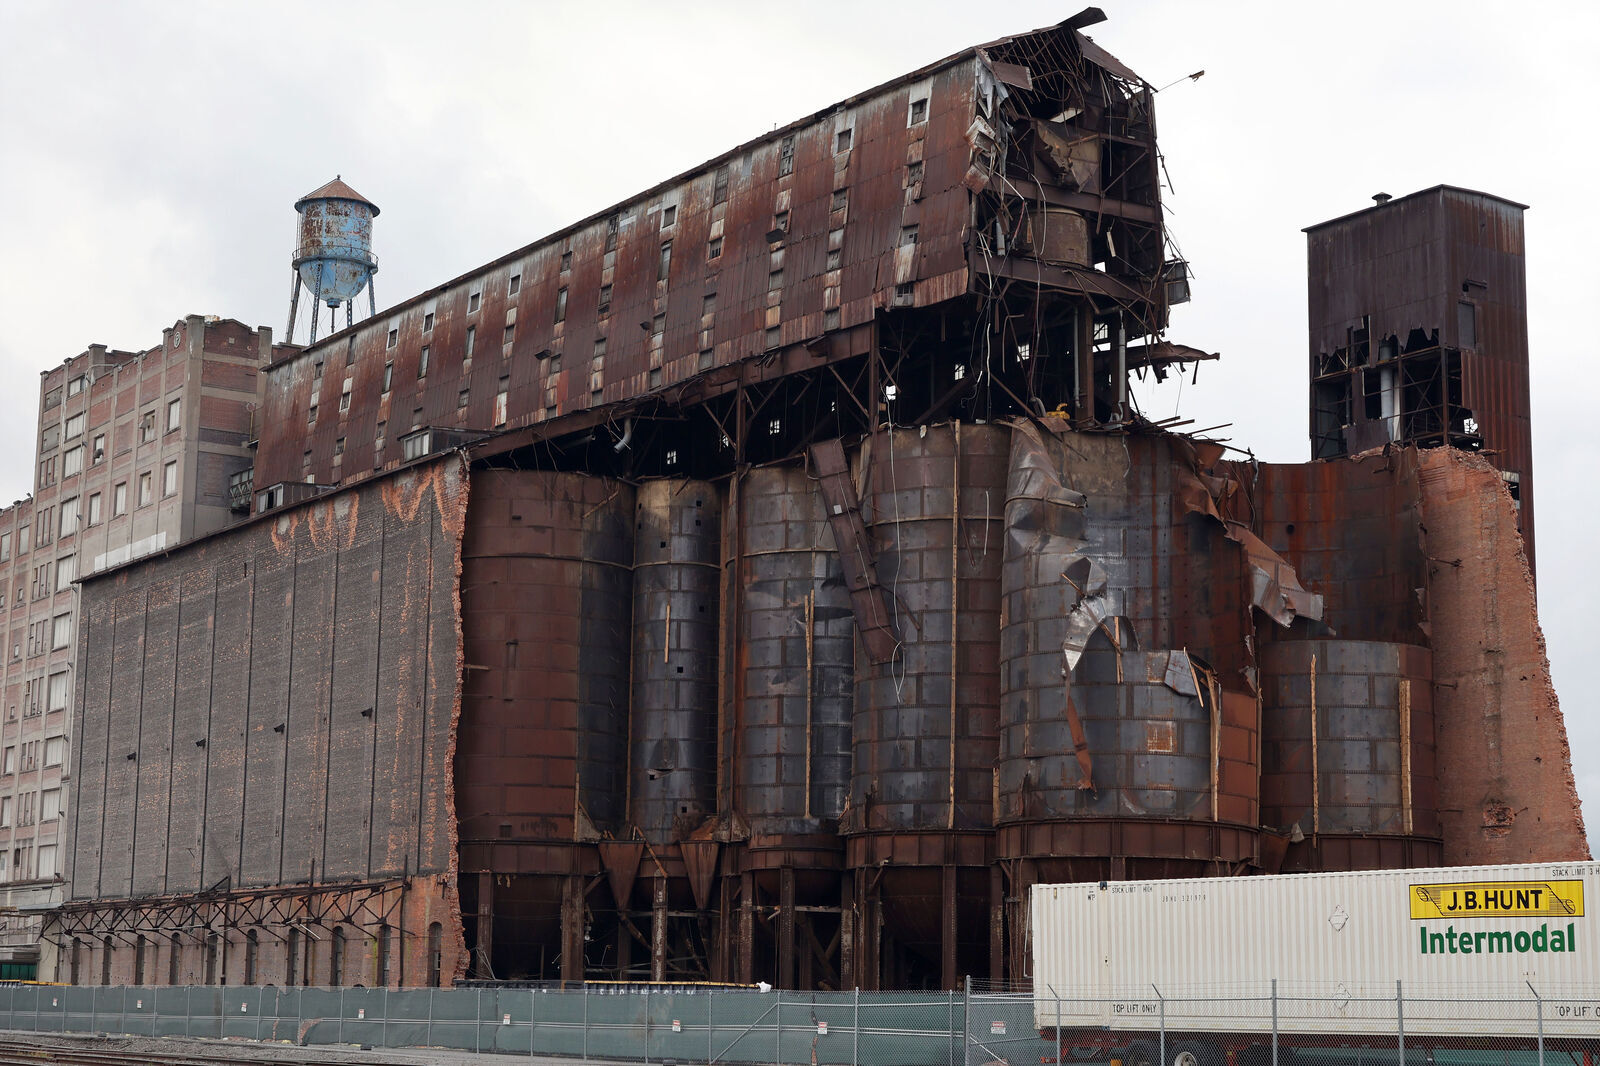 Complete coverage: The Great Northern grain elevator controversy